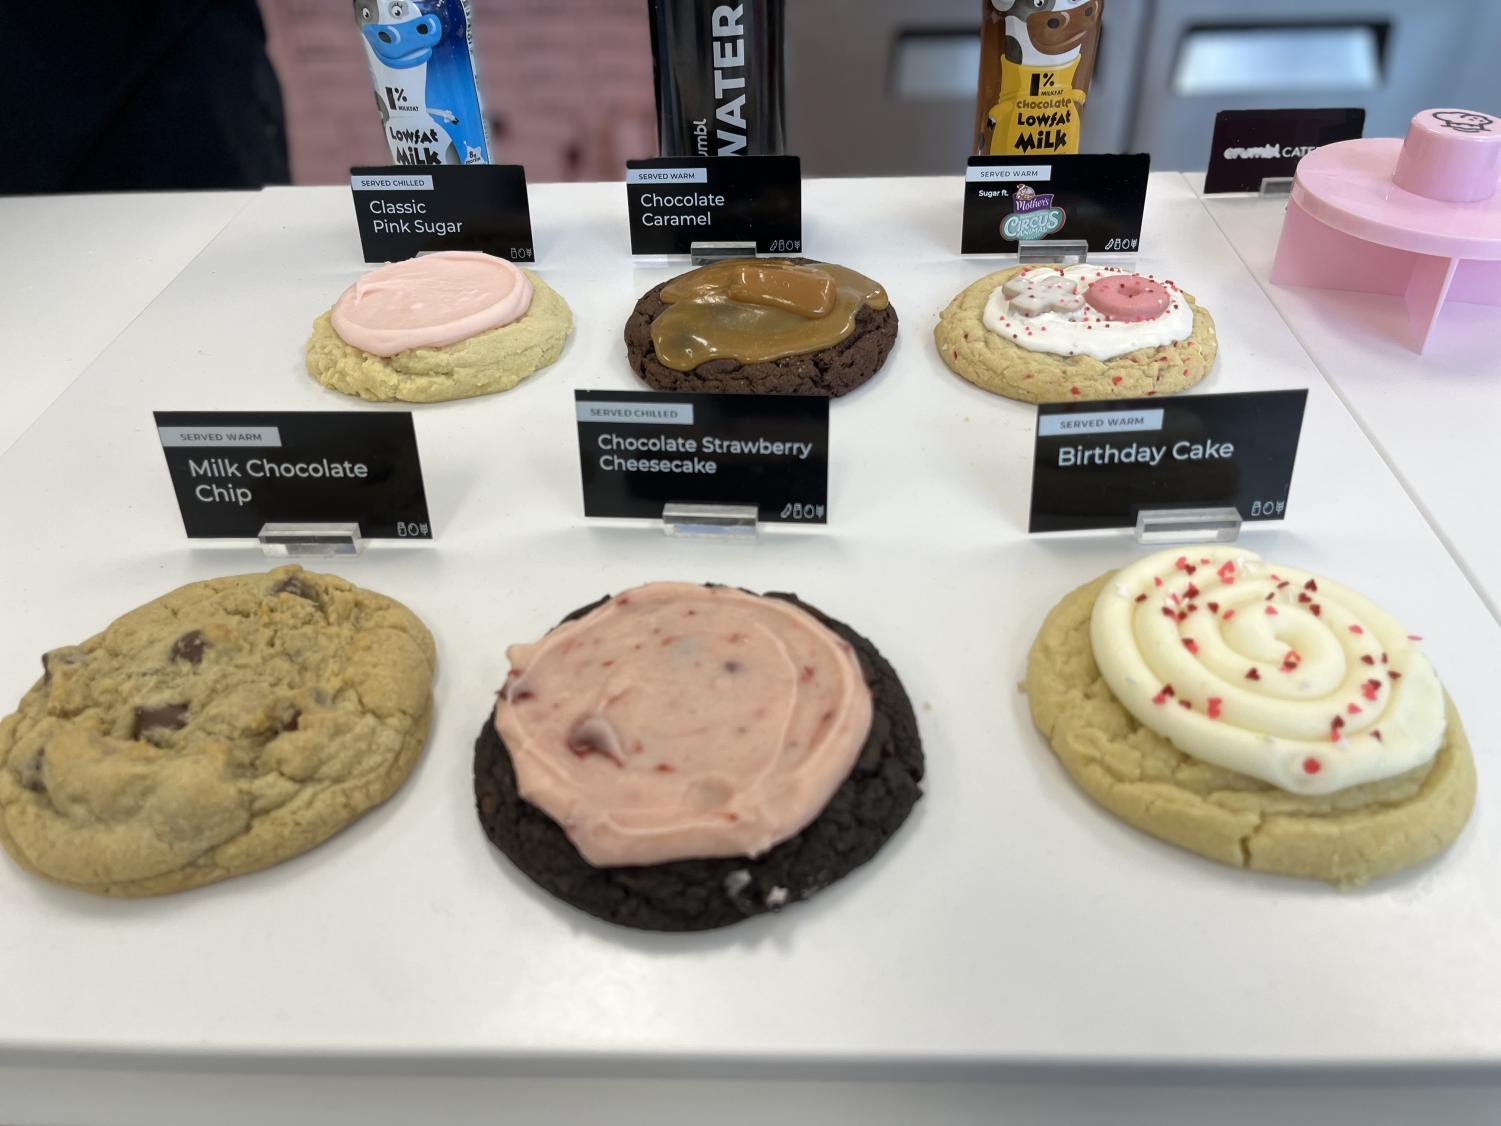 21 Crumbl Cookie Flavors Ranked Best to Worst - Let's Eat Cake